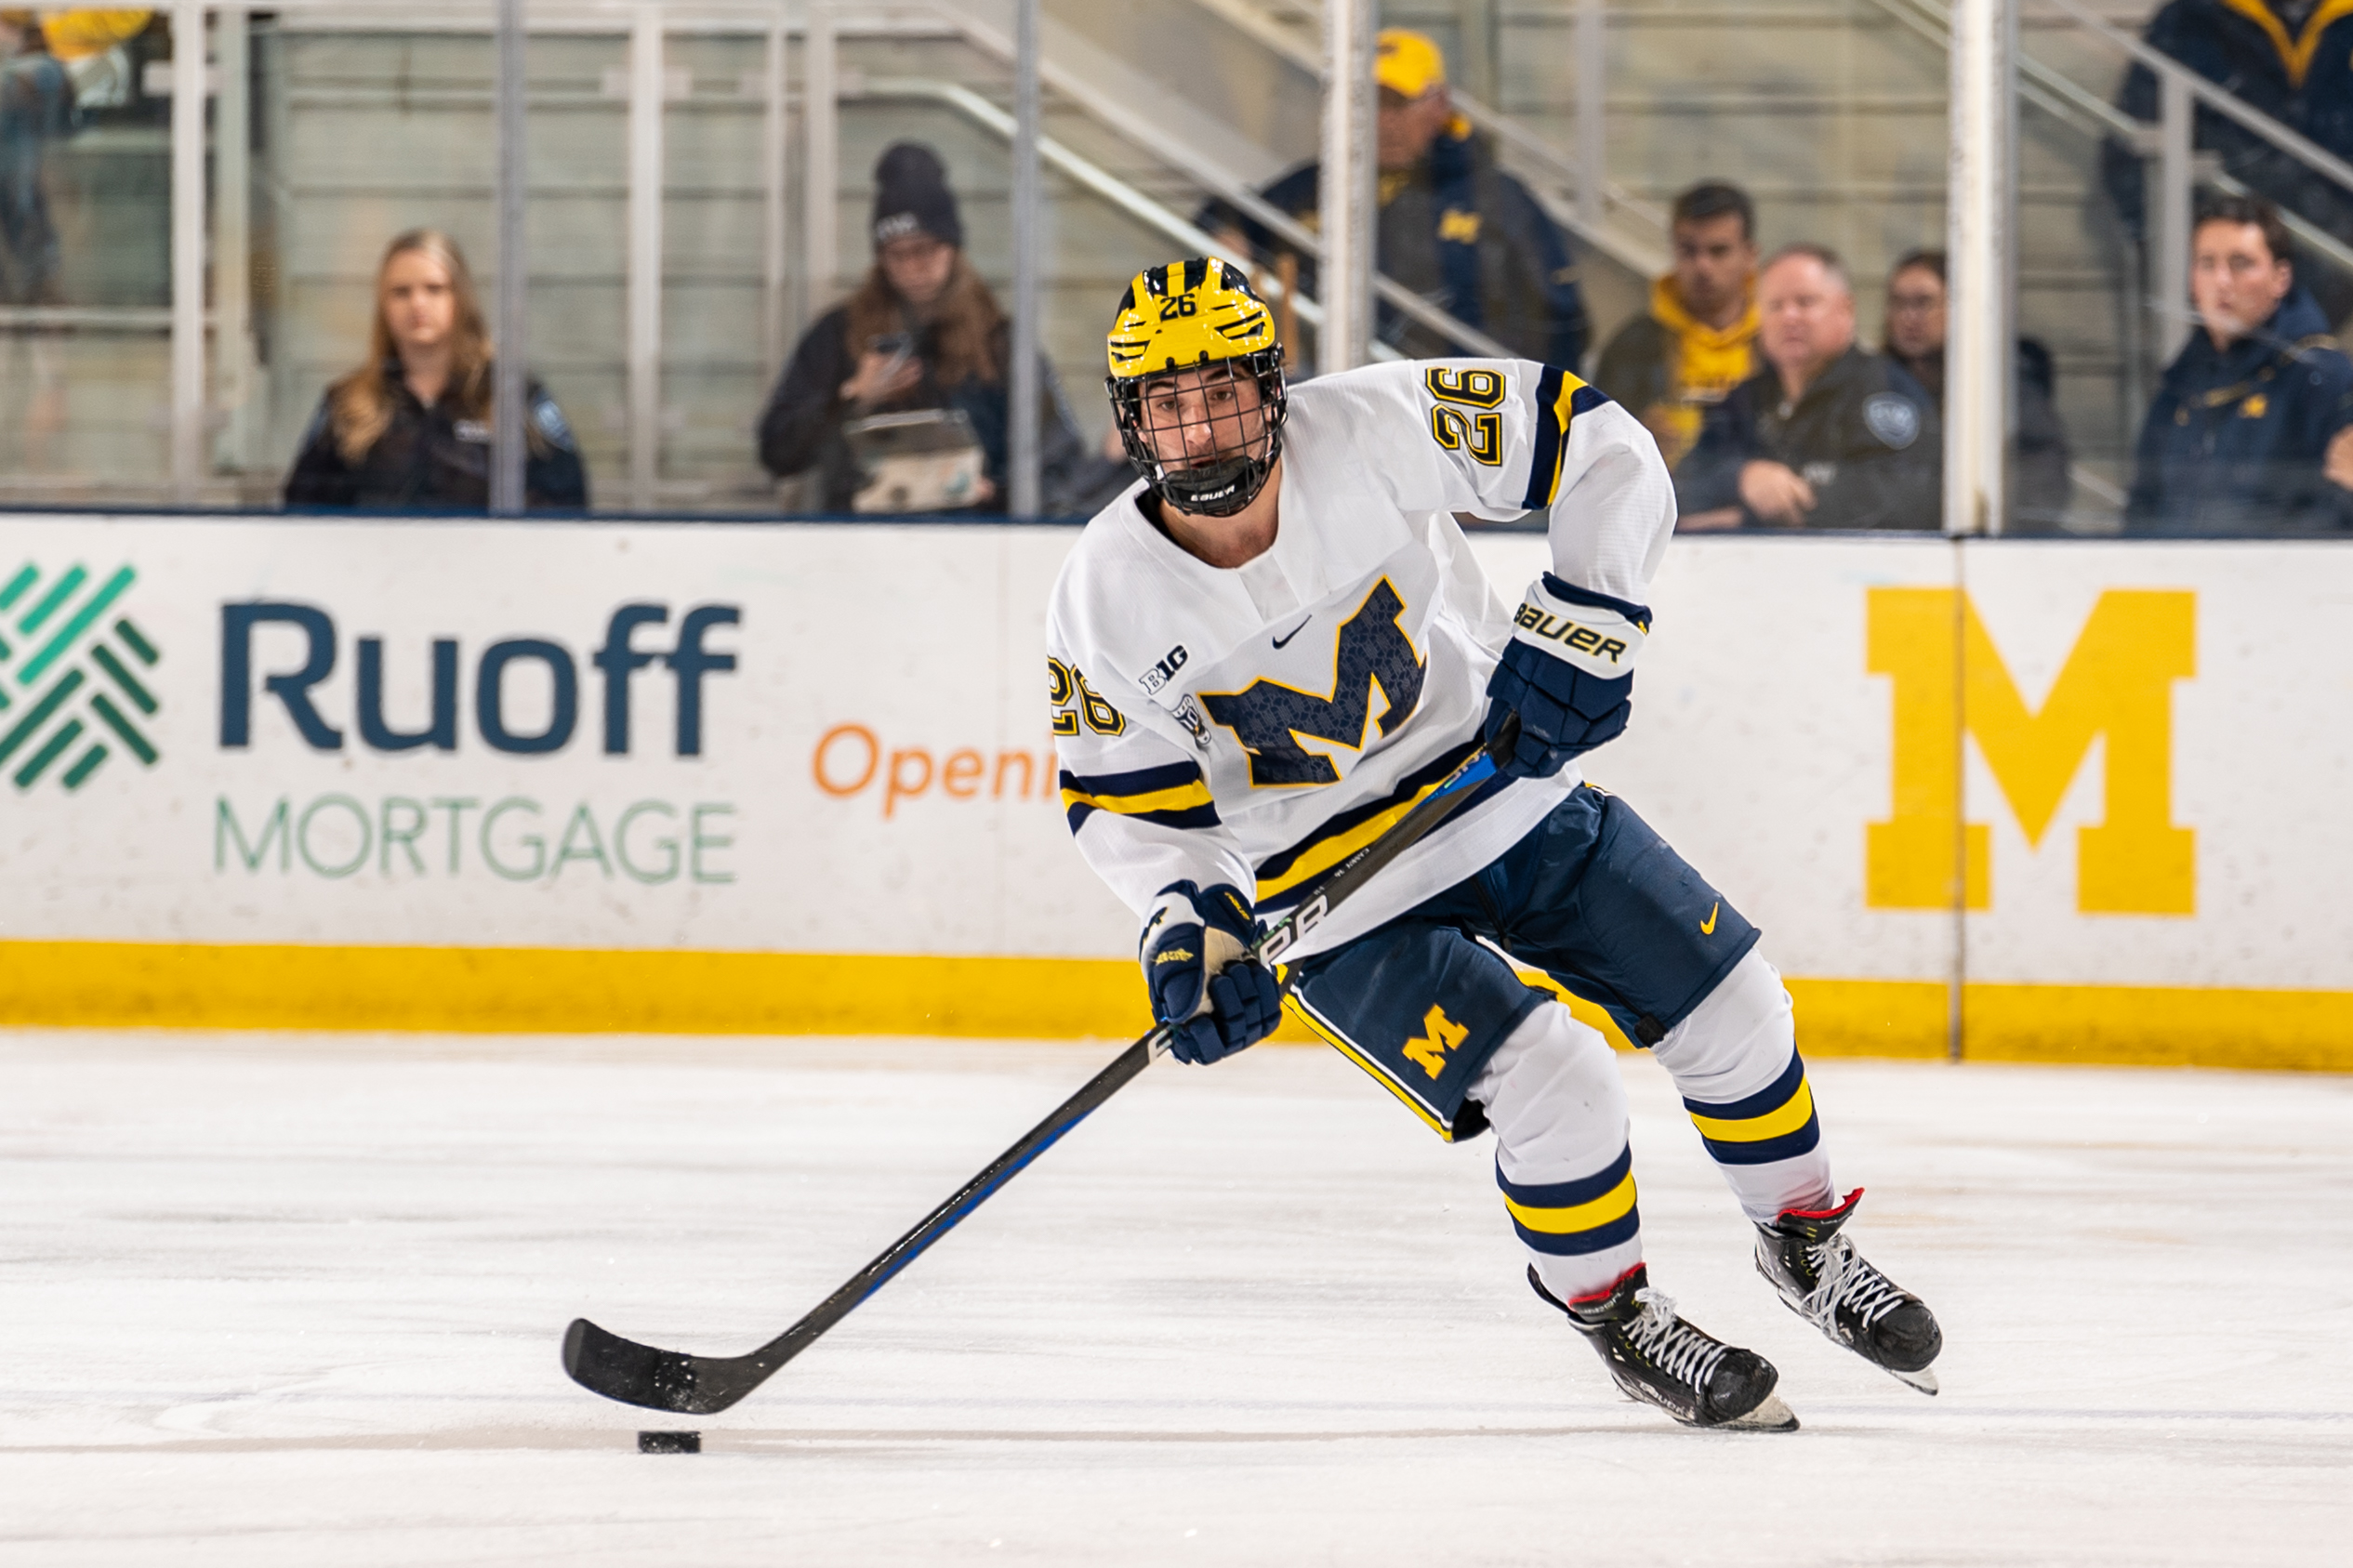 Michigan's Hughes signs NHL deal with Devils, gives up last two seasons on  Wolverines' blue line - College Hockey